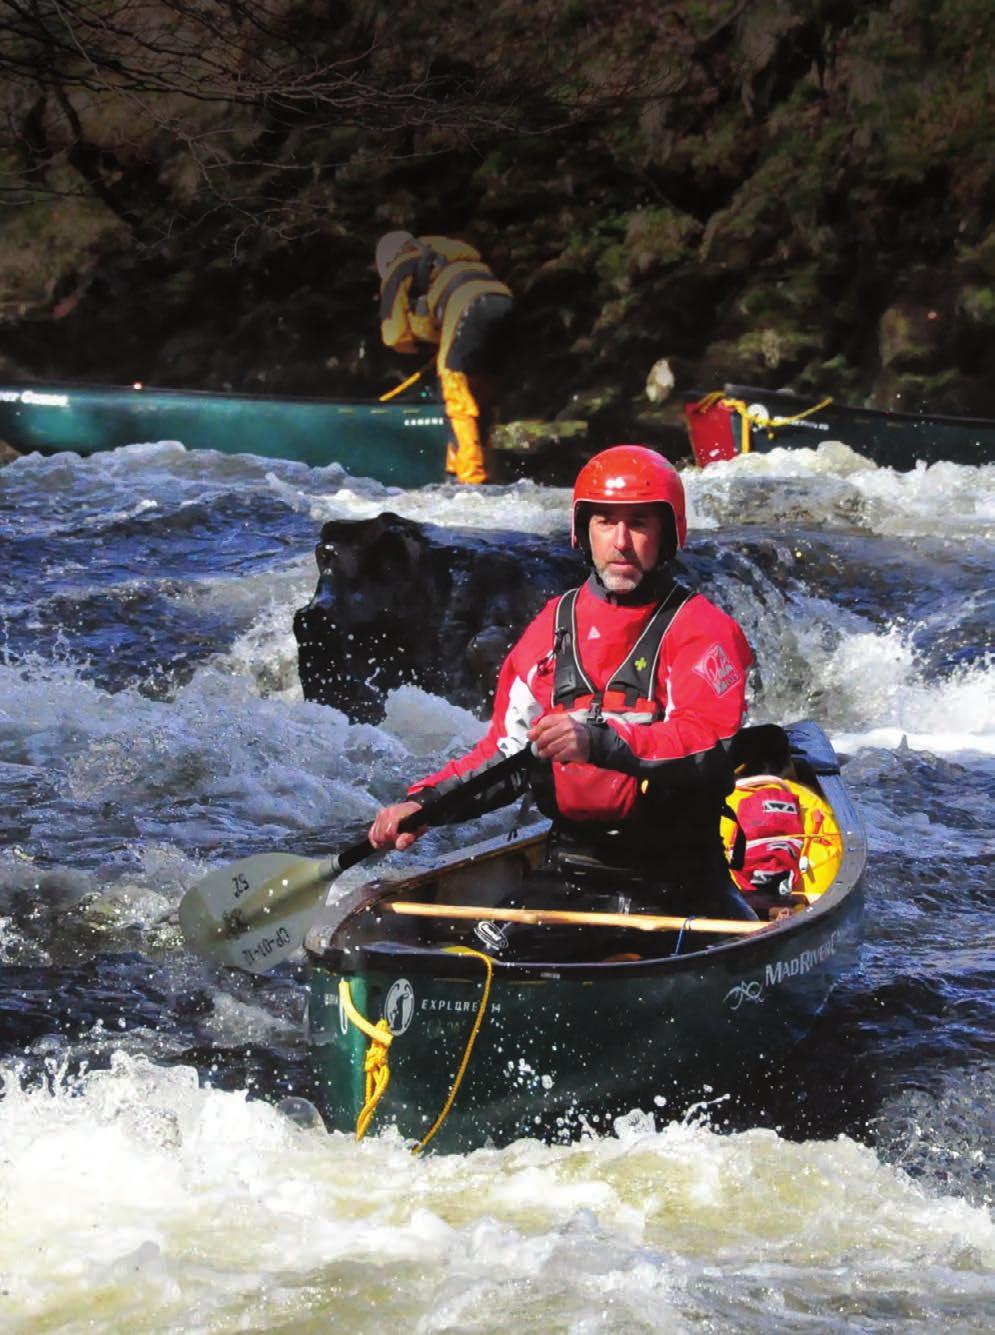 Open canoeing Scotland offers some of the best open canoeing adventures in the UK, and Glenmore Lodge is based in the perfect location to seek these out.